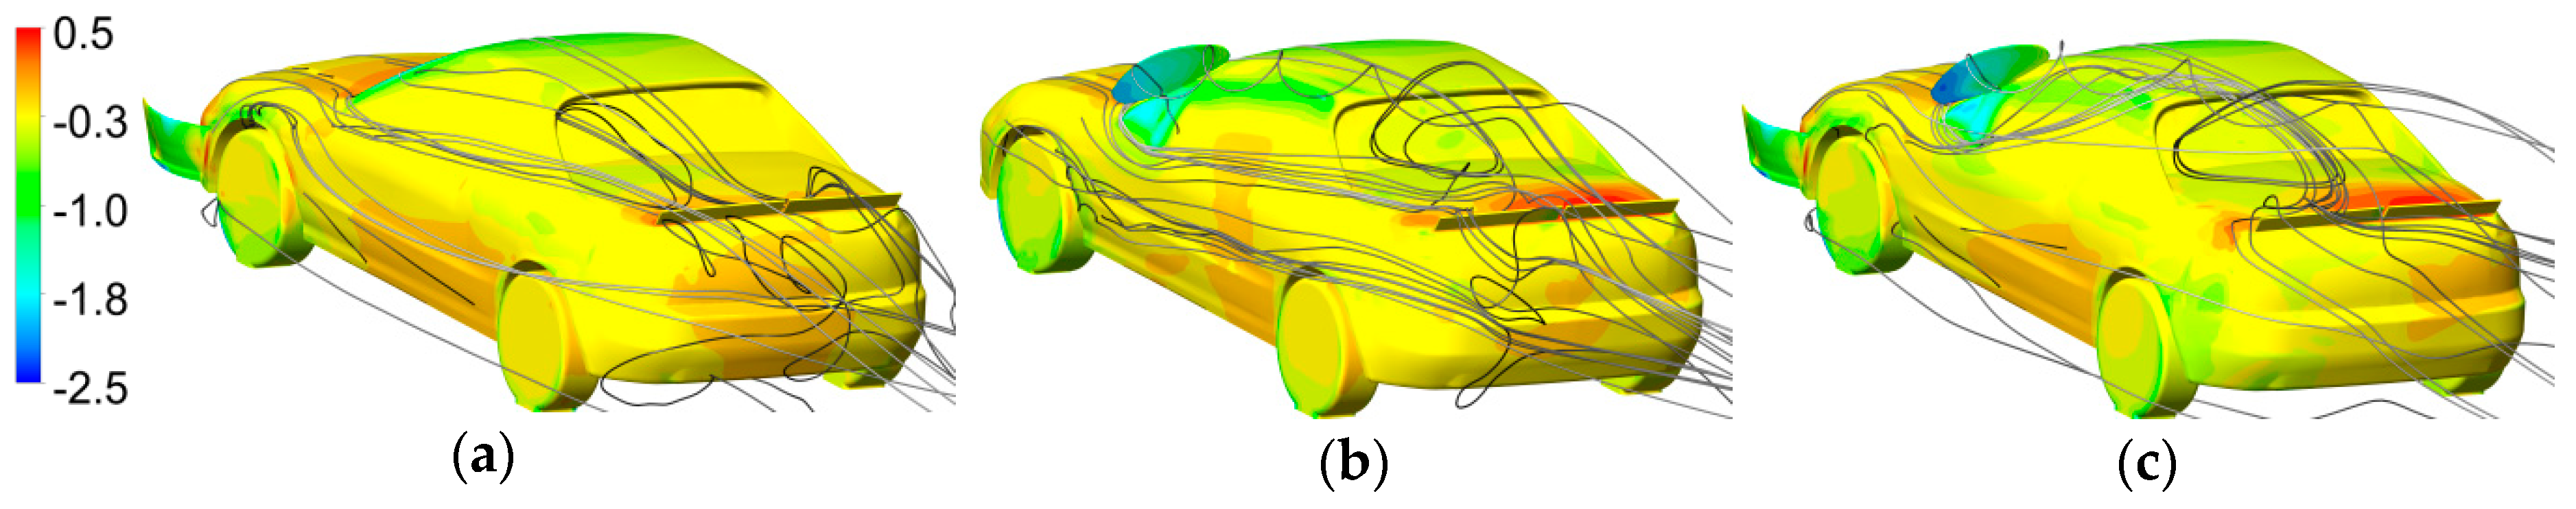 Energies Free Full Text Influence Of Side Spoilers On The Aerodynamic Properties Of A Sports Car Html